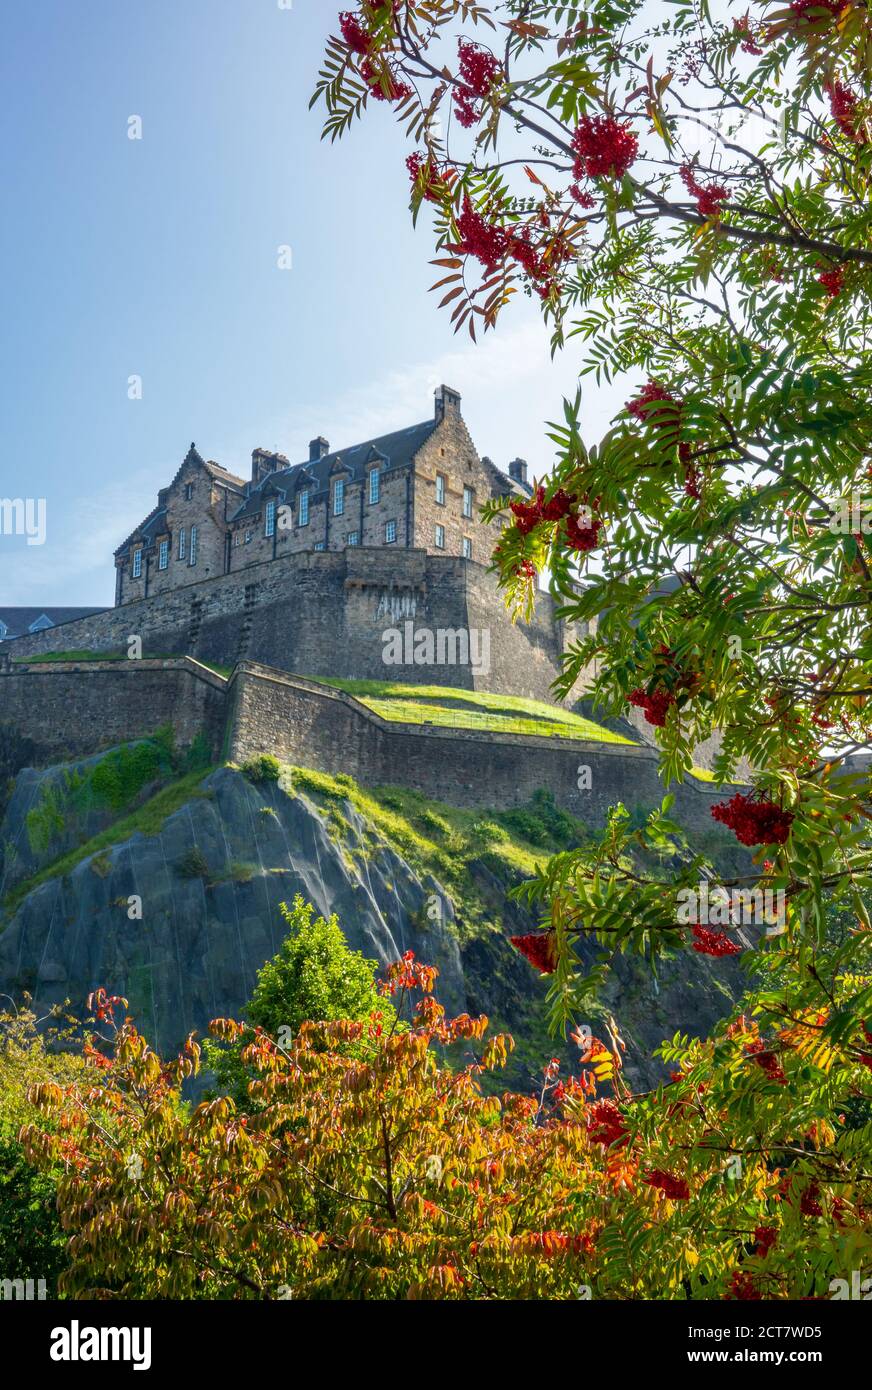 Edinburgh Castle, With Focus On Trees In Princes Street Gardens In The Foreground Stock Photo